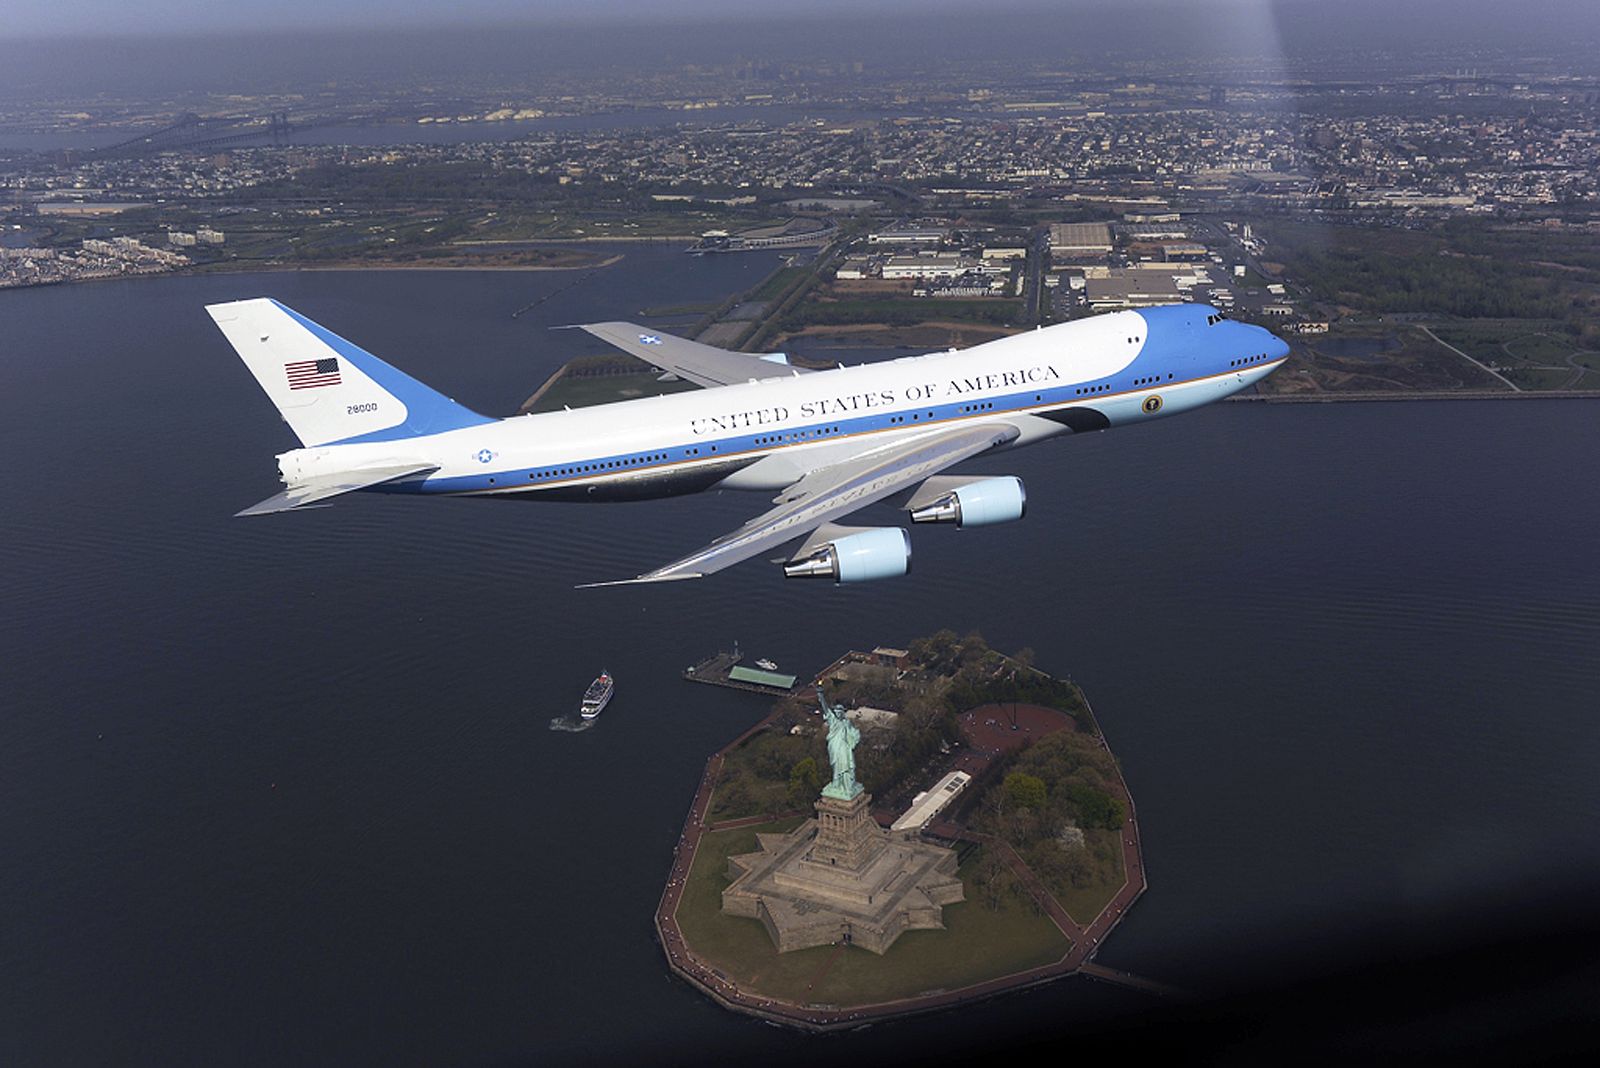 Handout of Air Force presidential aircraft, part of the fleet used by U.S. presidents, is pictured above the Statue of Liberty in New York